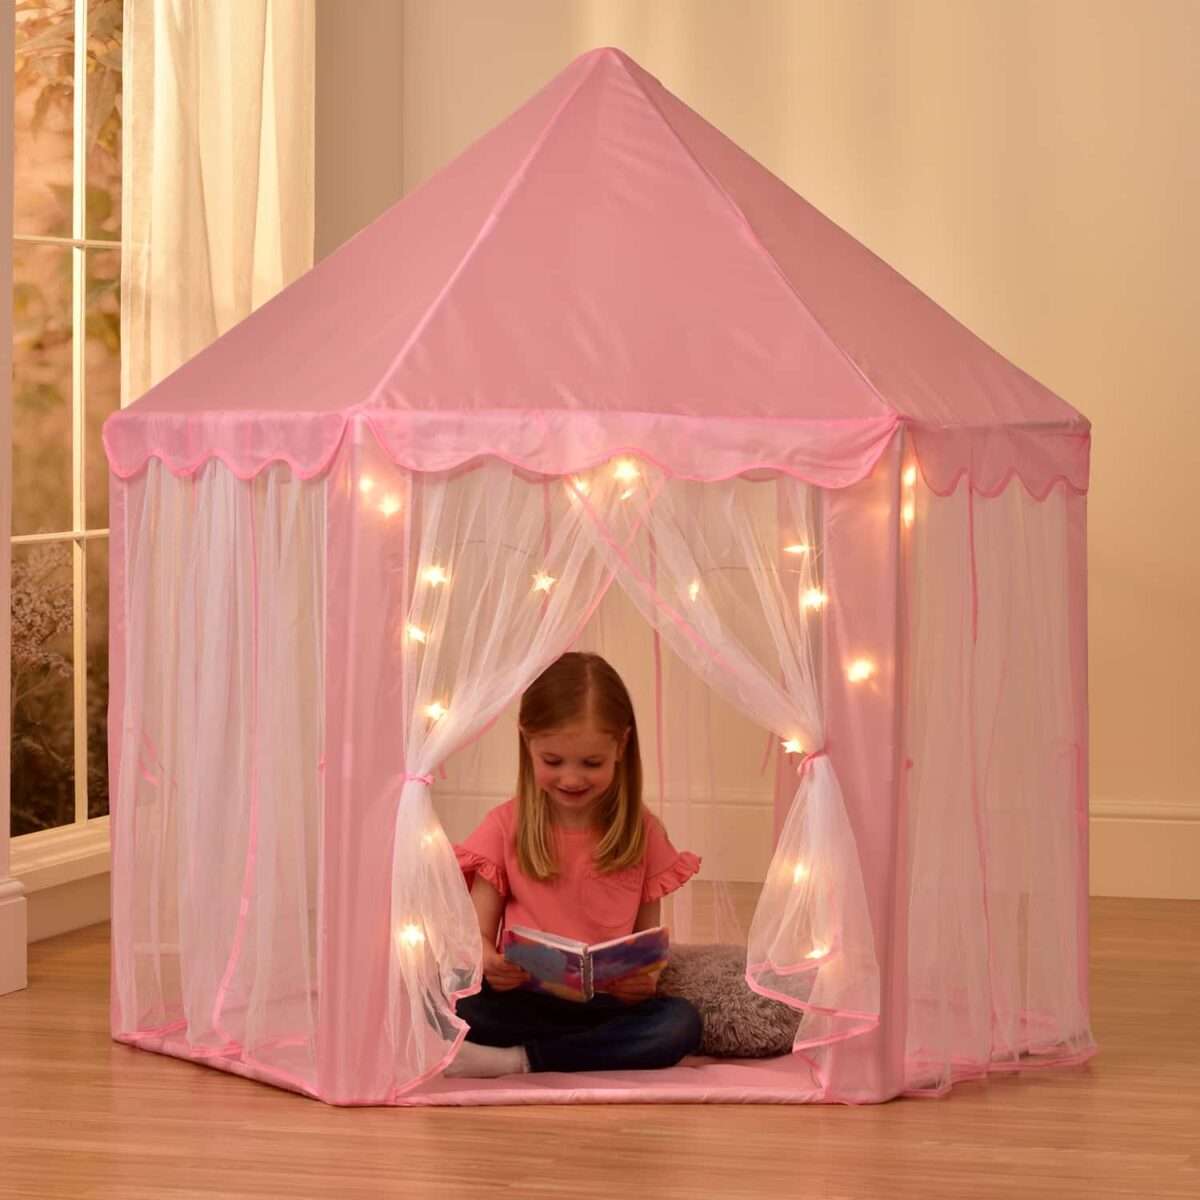 A girl sitting in her barbie camping tent